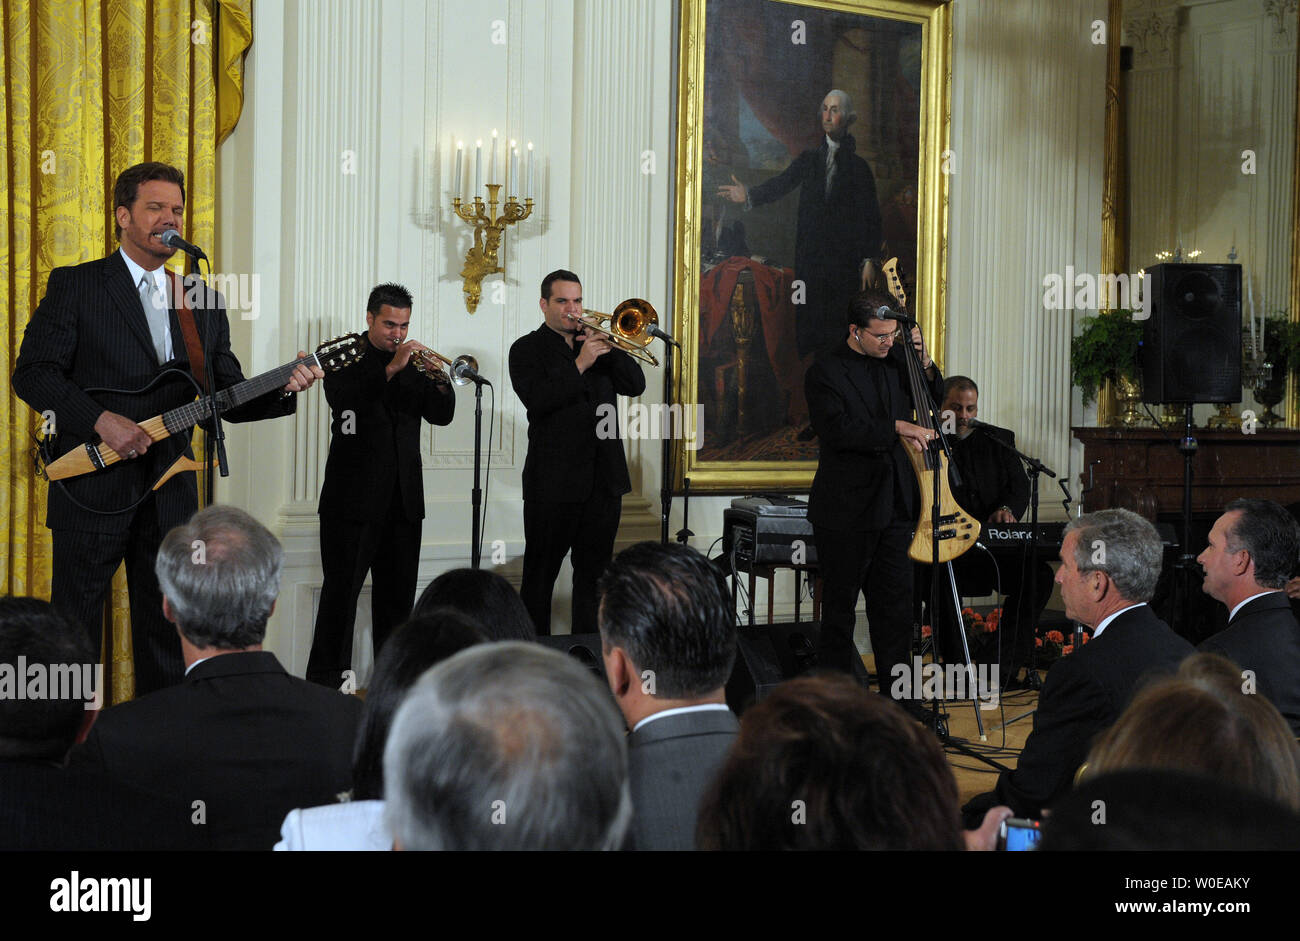 U.S. President George W. Bush listens to Willy Chirino perform after Bush called for more freedom and democracy in Cuba during a event to express solidarity with Cubans in the East Room of the White House on May 21, 2008.   (UPI Photo/Roger L. Wollenberg) Stock Photo